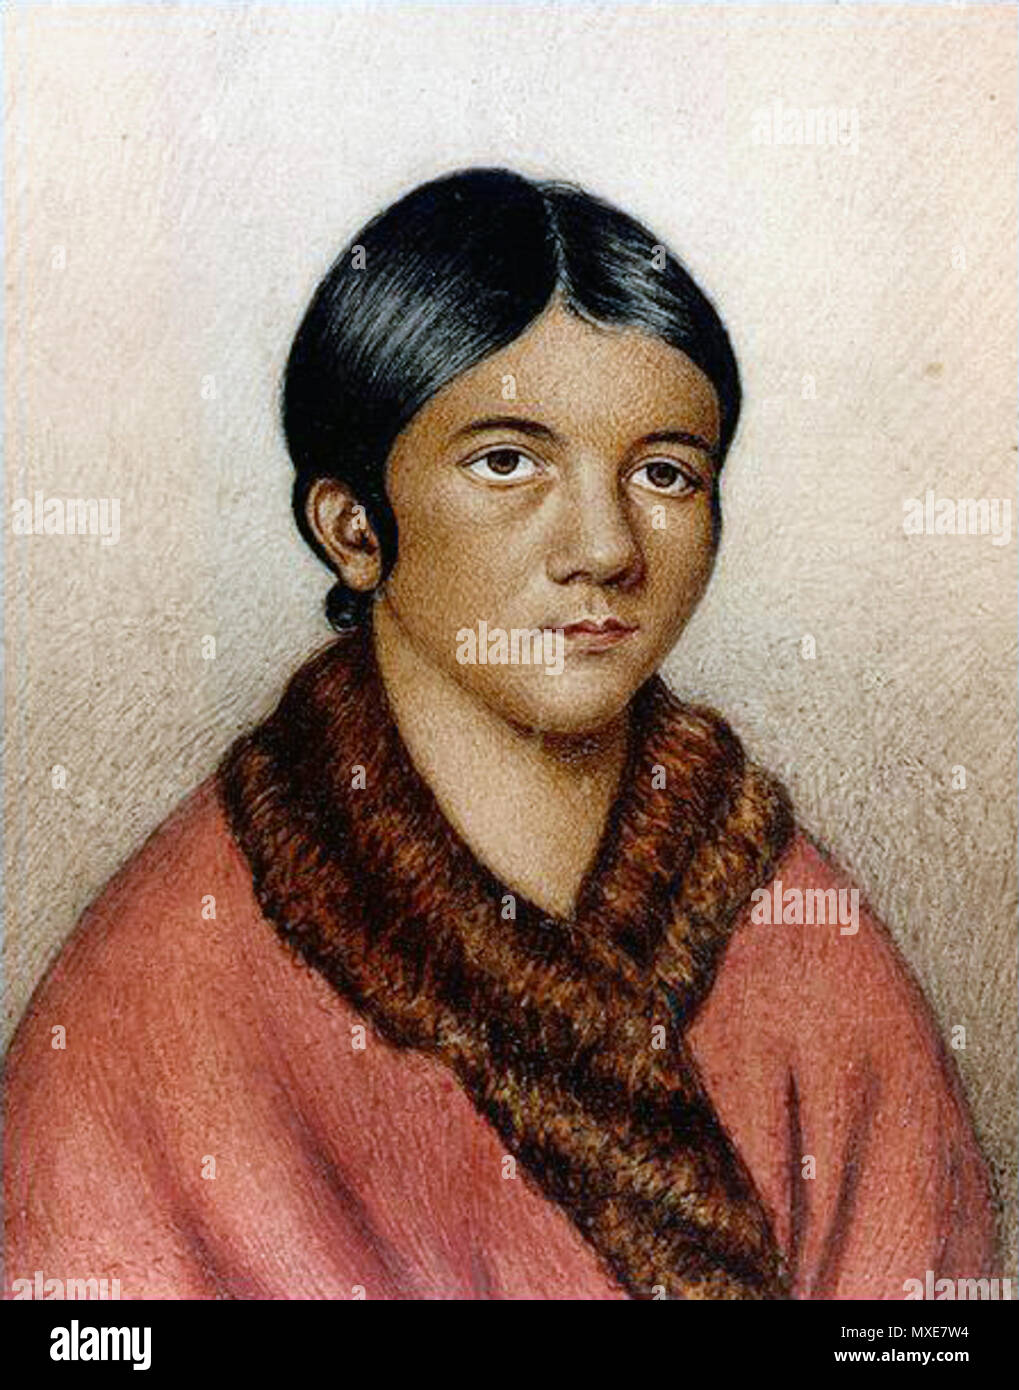 . English: A miniature portrait titled 'A female Red Indian of Newfoundland' which some sources date to 1841. It is believed to be a portrait of Shanawdithit, a Beothuk woman. Most likely a painted copy of Portrait of Demasduit (Mary March), by Lady Henrietta Hamilton (1819, see File:Demasduit.jpg). Although sometimes attributed to William Gosse, the painter was more likely naturalist Philip Henry Gosse (see also Mullen, Gary R., 'Philip Henry Gosse,' Encyclopedia of Alabama, 26 August 2008, retrieved 9 September 2011) . circa 1841. William Gosse more likely Philip Henry Gosse 555 Shanawdithit Stock Photo